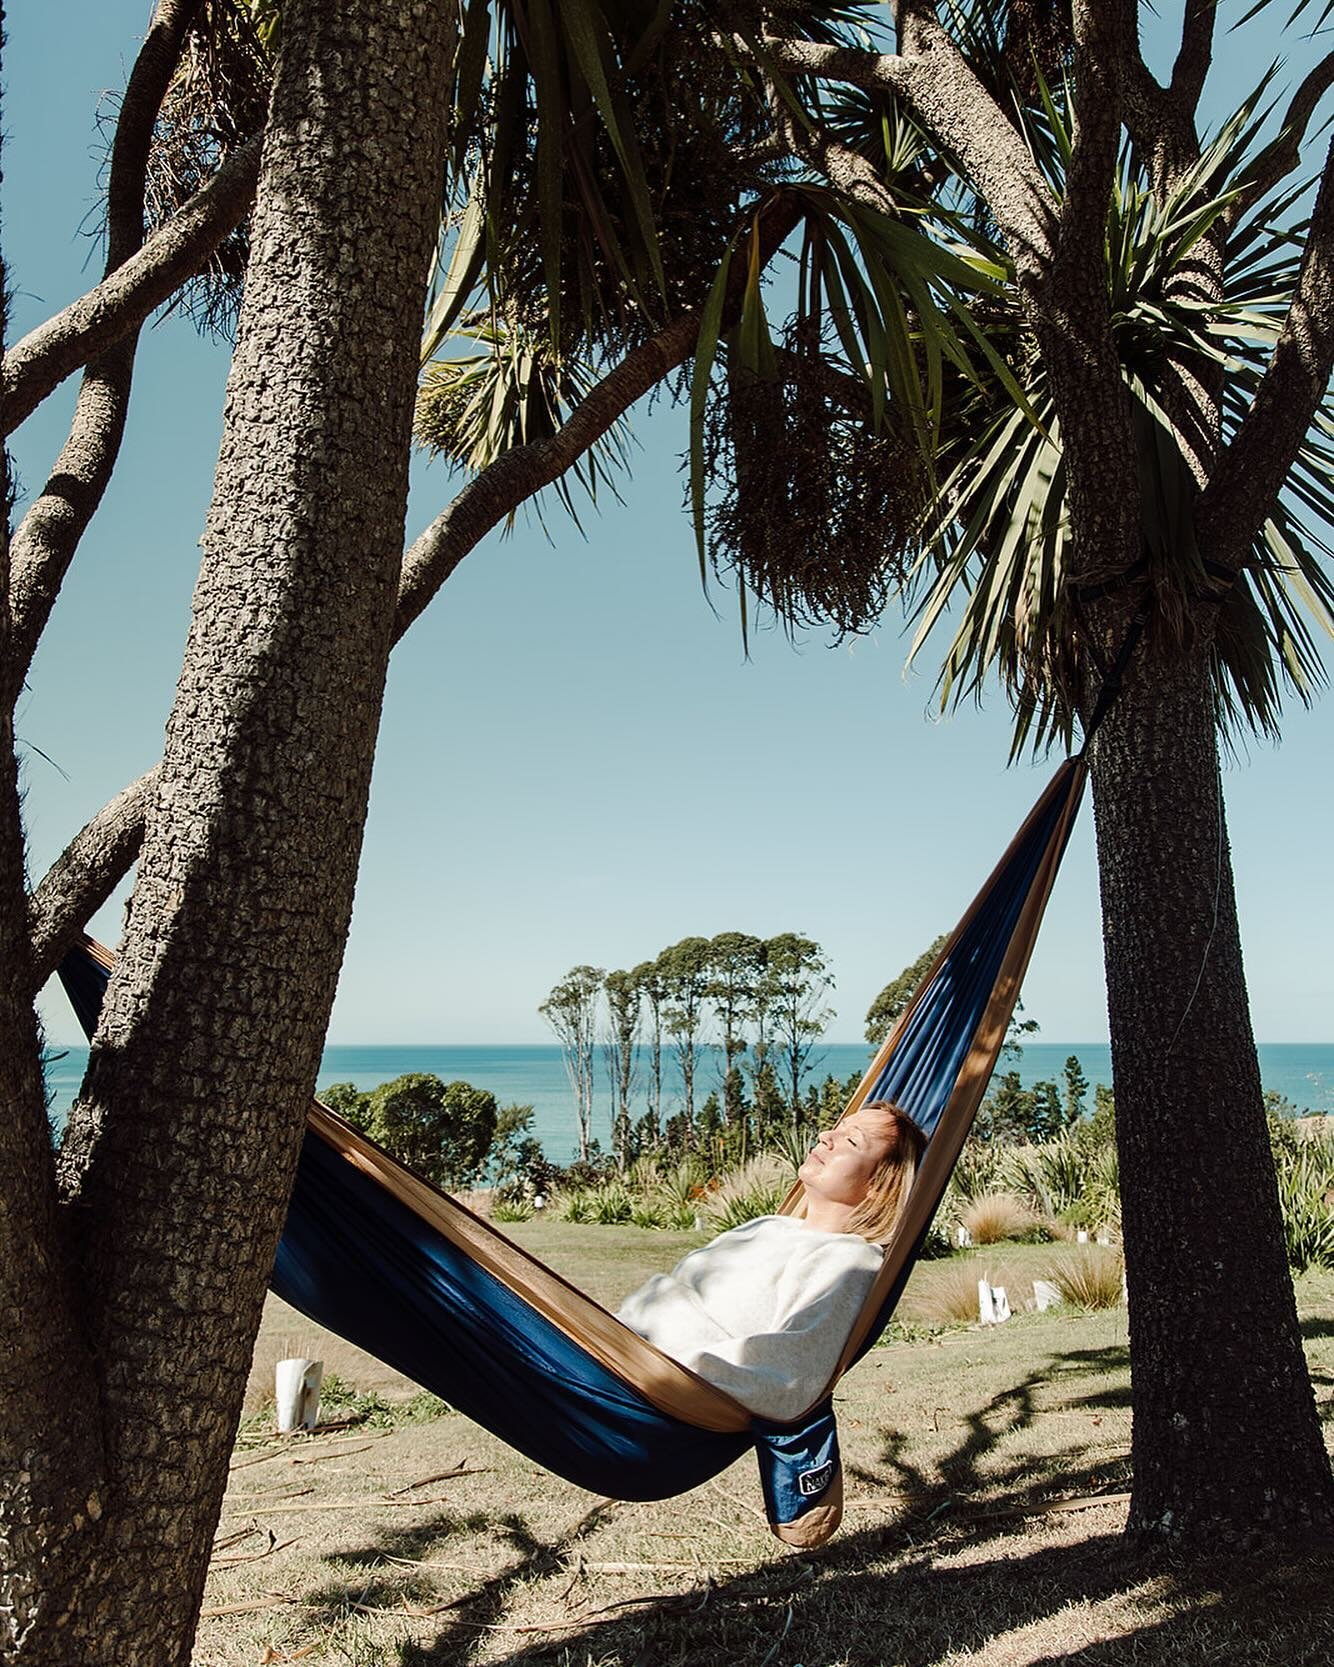 Some days are just for finding quiet places in the sun and leaning into SLOW&hellip; Deep breaths ; the warmth of sun in your face ; the heady perfume of the cabbage trees ; the sounds of the waves crashing onto the beach; and a feeling of weightless